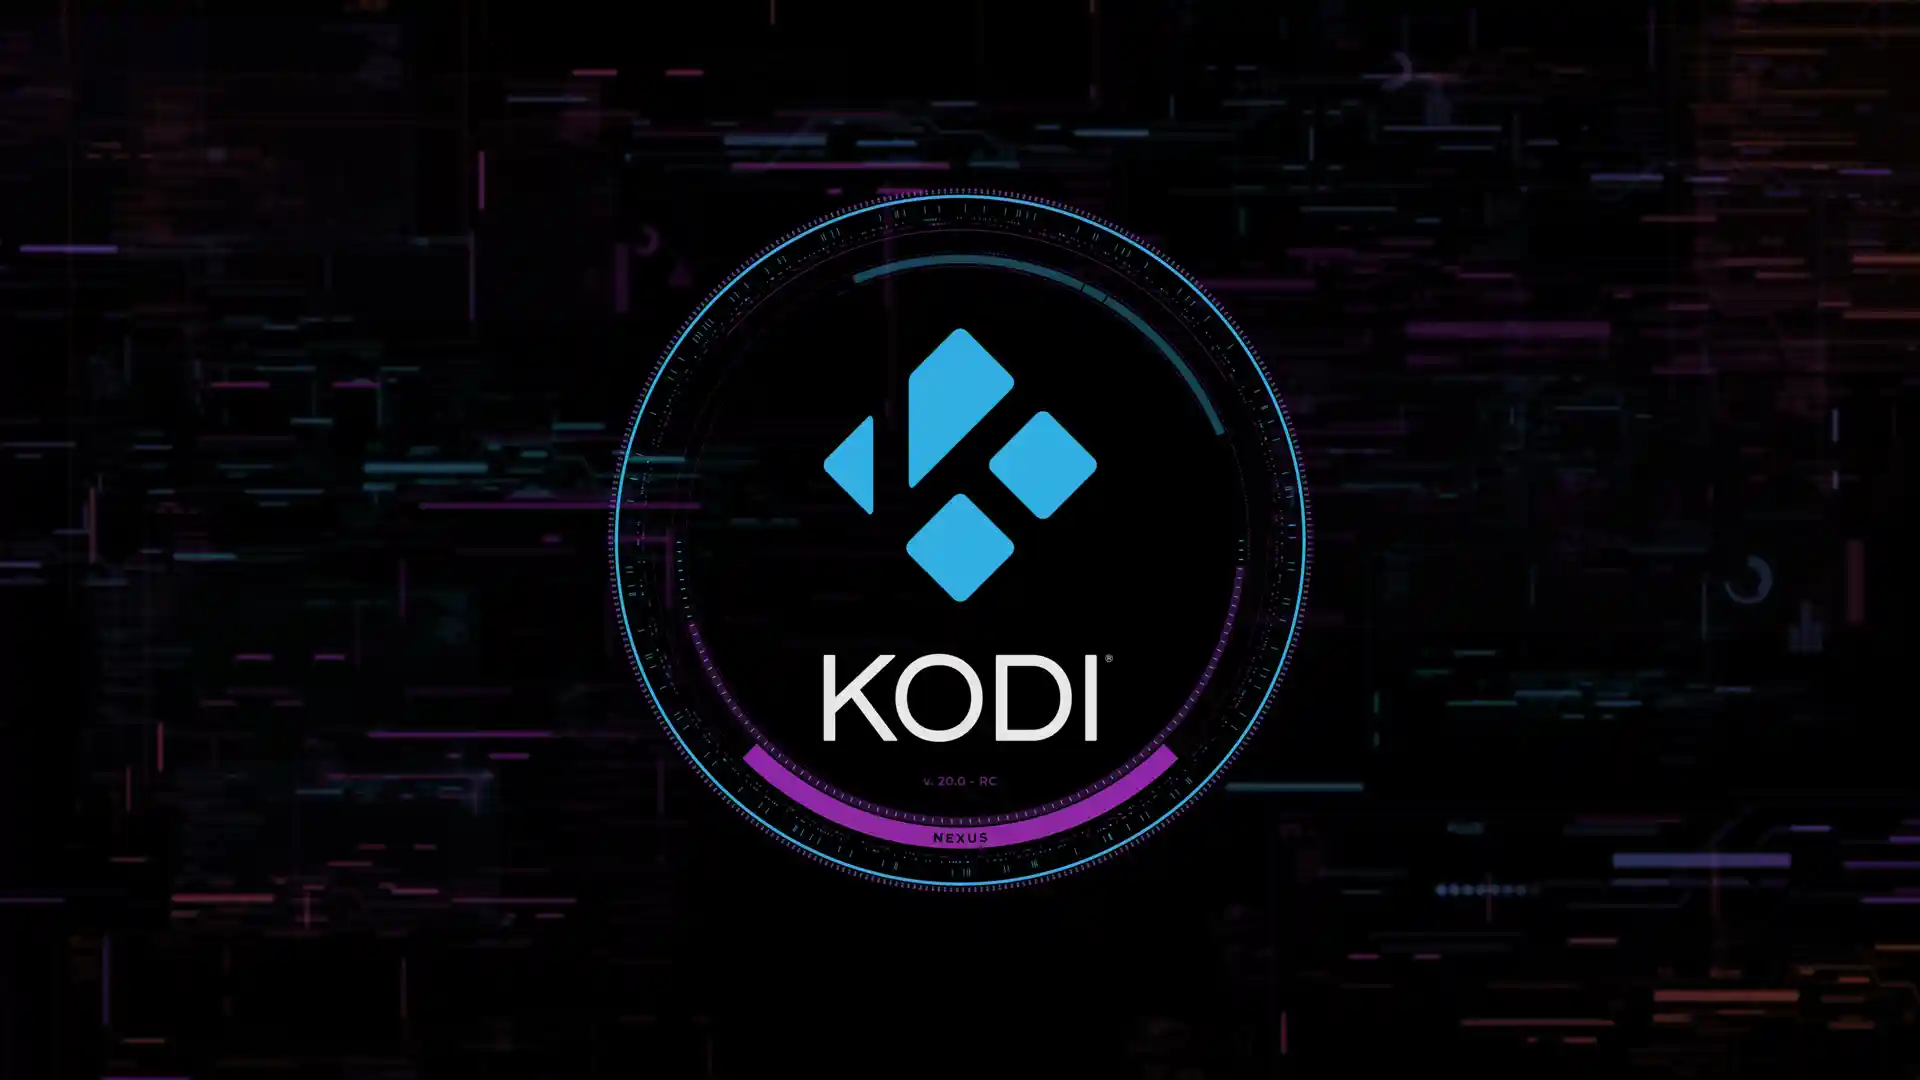 A blue Kodi logo sits in a circle, atop white text - "Kodi". Clock artefacts surround it all - a background of computer noise. At the bottom, a solitary purple section of the circle, "Kodi Nexus Release Candidate".